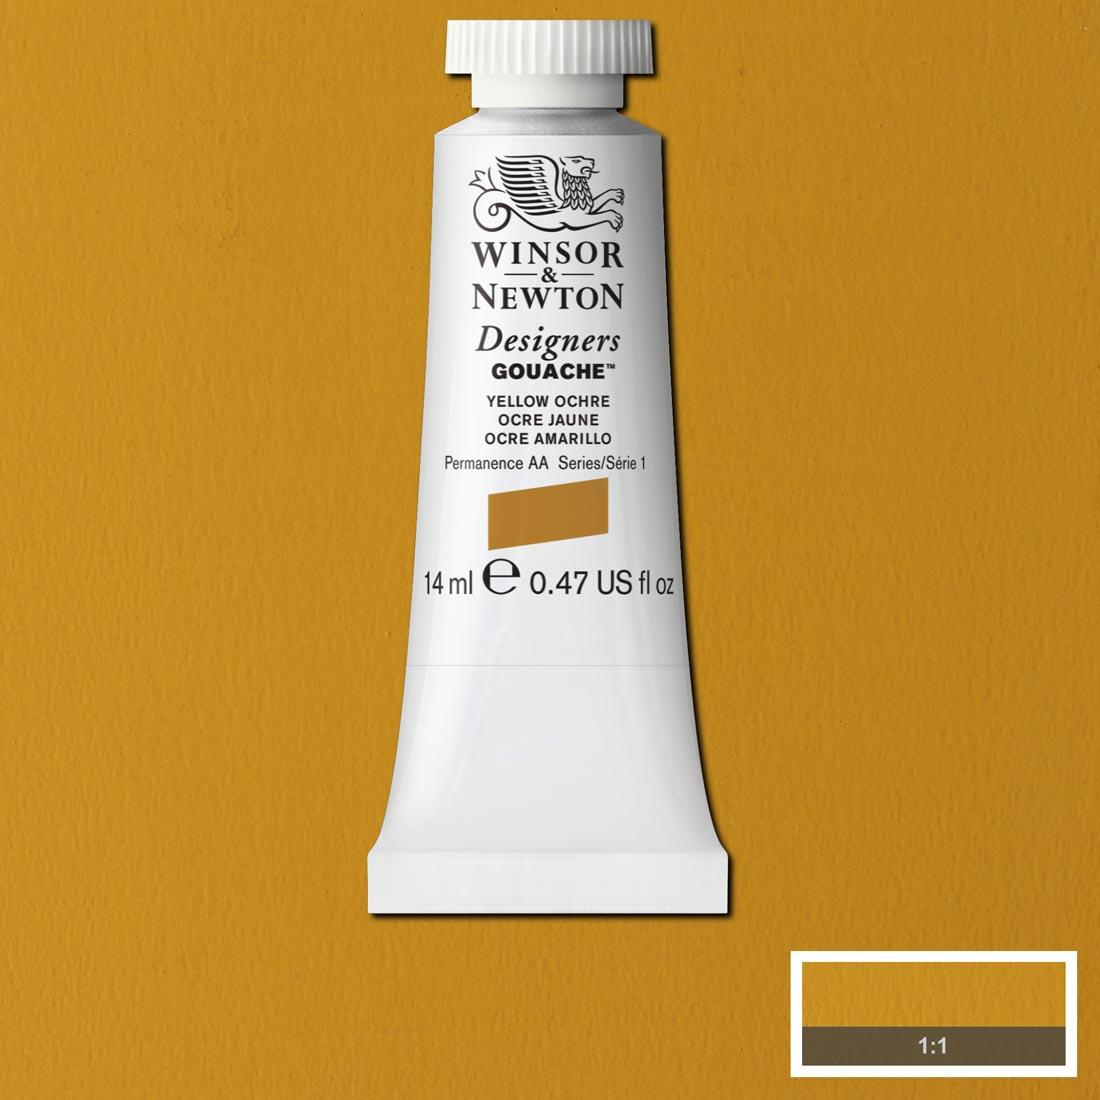 Tube of Yellow Ochre Winsor & Newton Designers Gouache with a paint swatch for the background